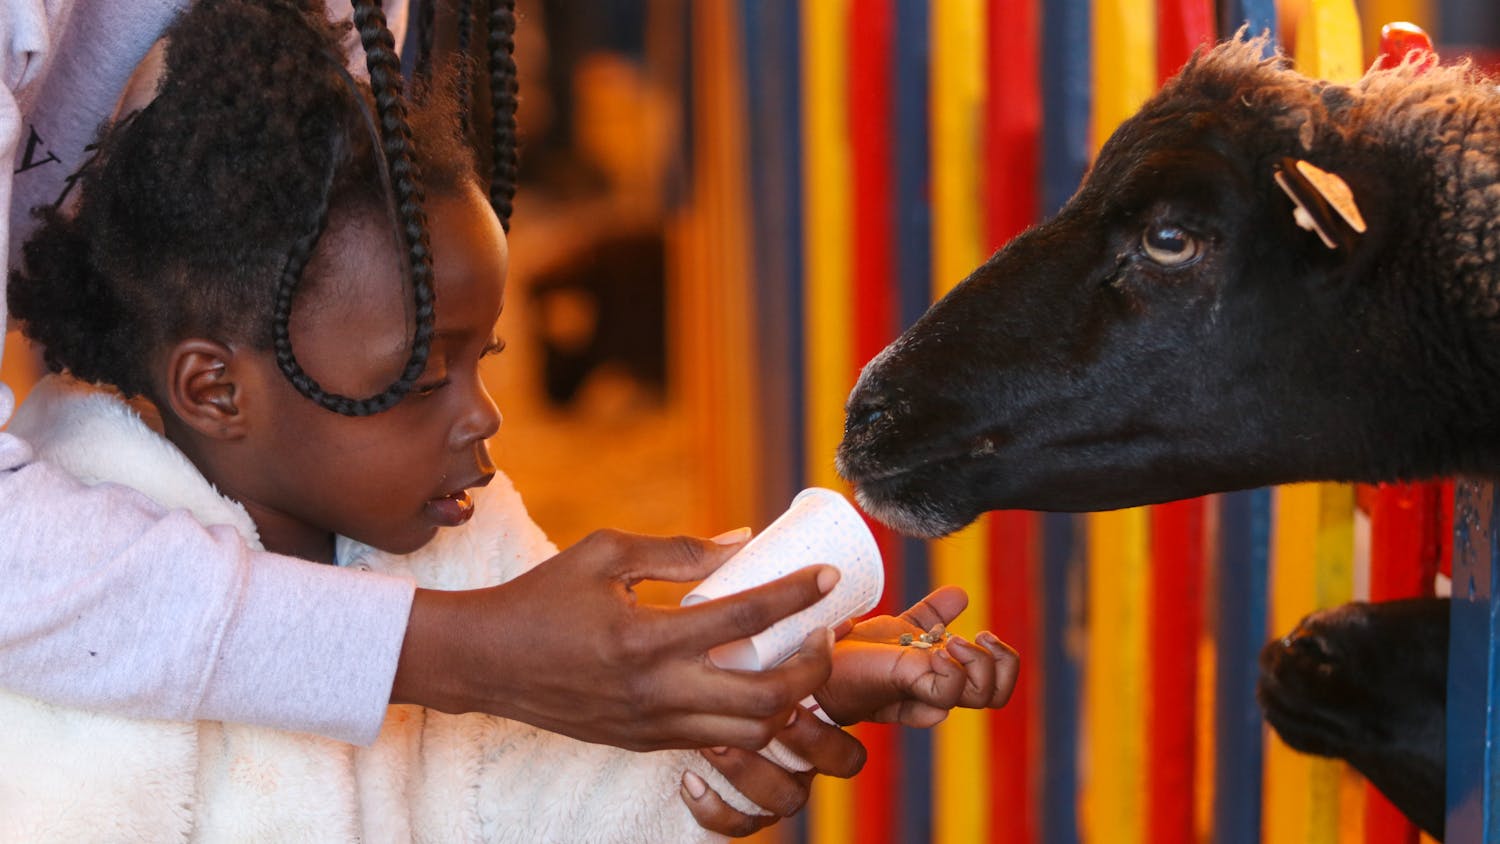 The little girl, Kali, is guided by her mother, Baray, in feeding the animals beyond the fence at the South Carolina State Fair petting zoo on Oct. 18, 2022. The petting zoo provides animals like goats and camels for fair attendees to feed and interact with.&nbsp;